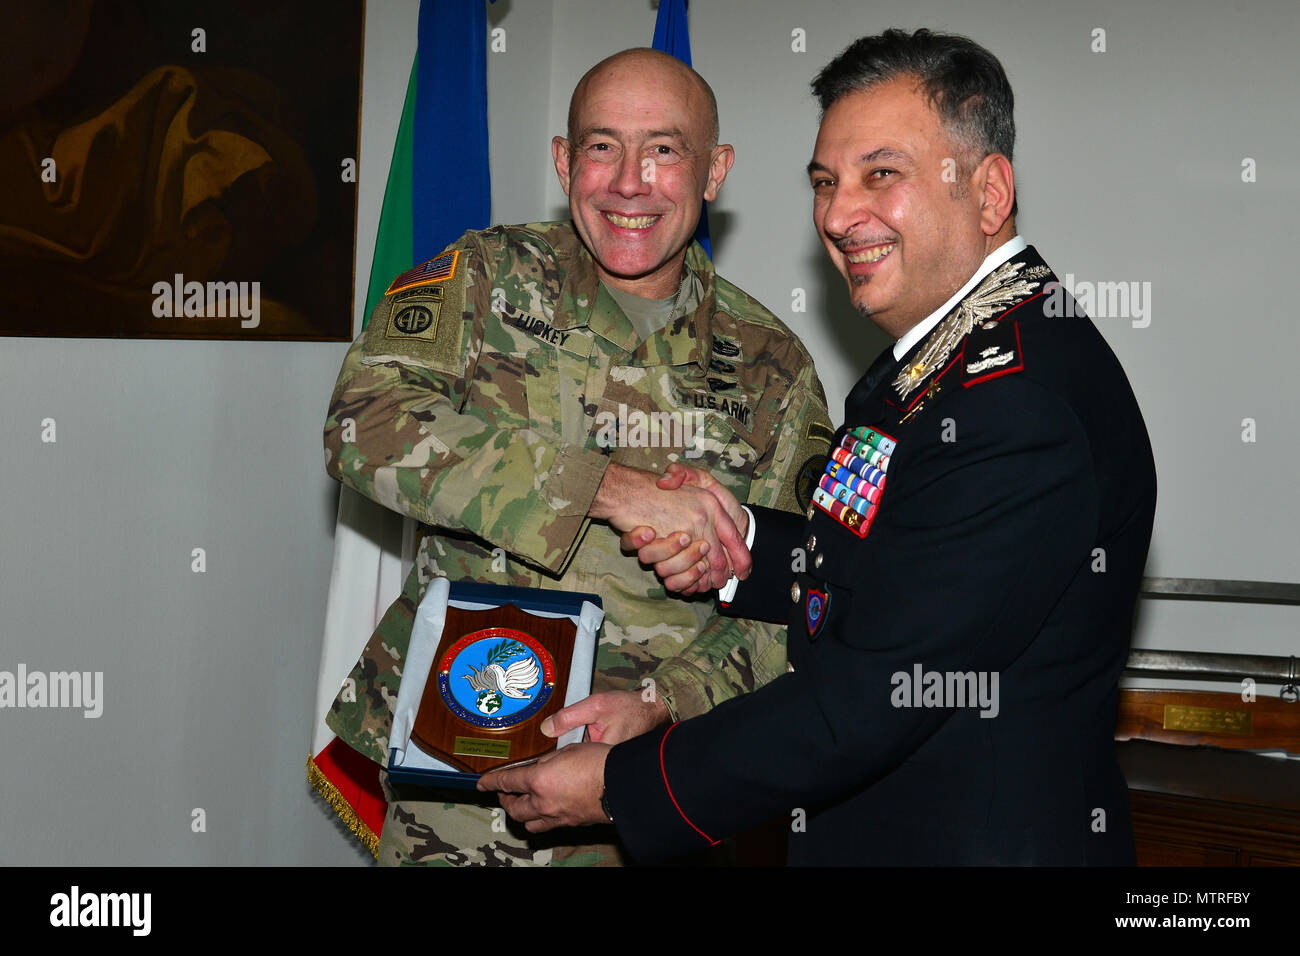 Brig. Gen. Giovanni Pietro Barbano (right), Center of Excellence for Stability Police Units (CoESPU) director, presents  Carabinieri CoESPU crest at Lt. Gen. Charles D. Luckey (left), Commanding General U.S. Army Reserve Command, during visit at Center of Excellence for Stability Police Units (CoESPU) Vicenza, Italy, January 20, 2017.(U.S. Army Photo by Visual Information Specialist Paolo Bovo/released) Stock Photo